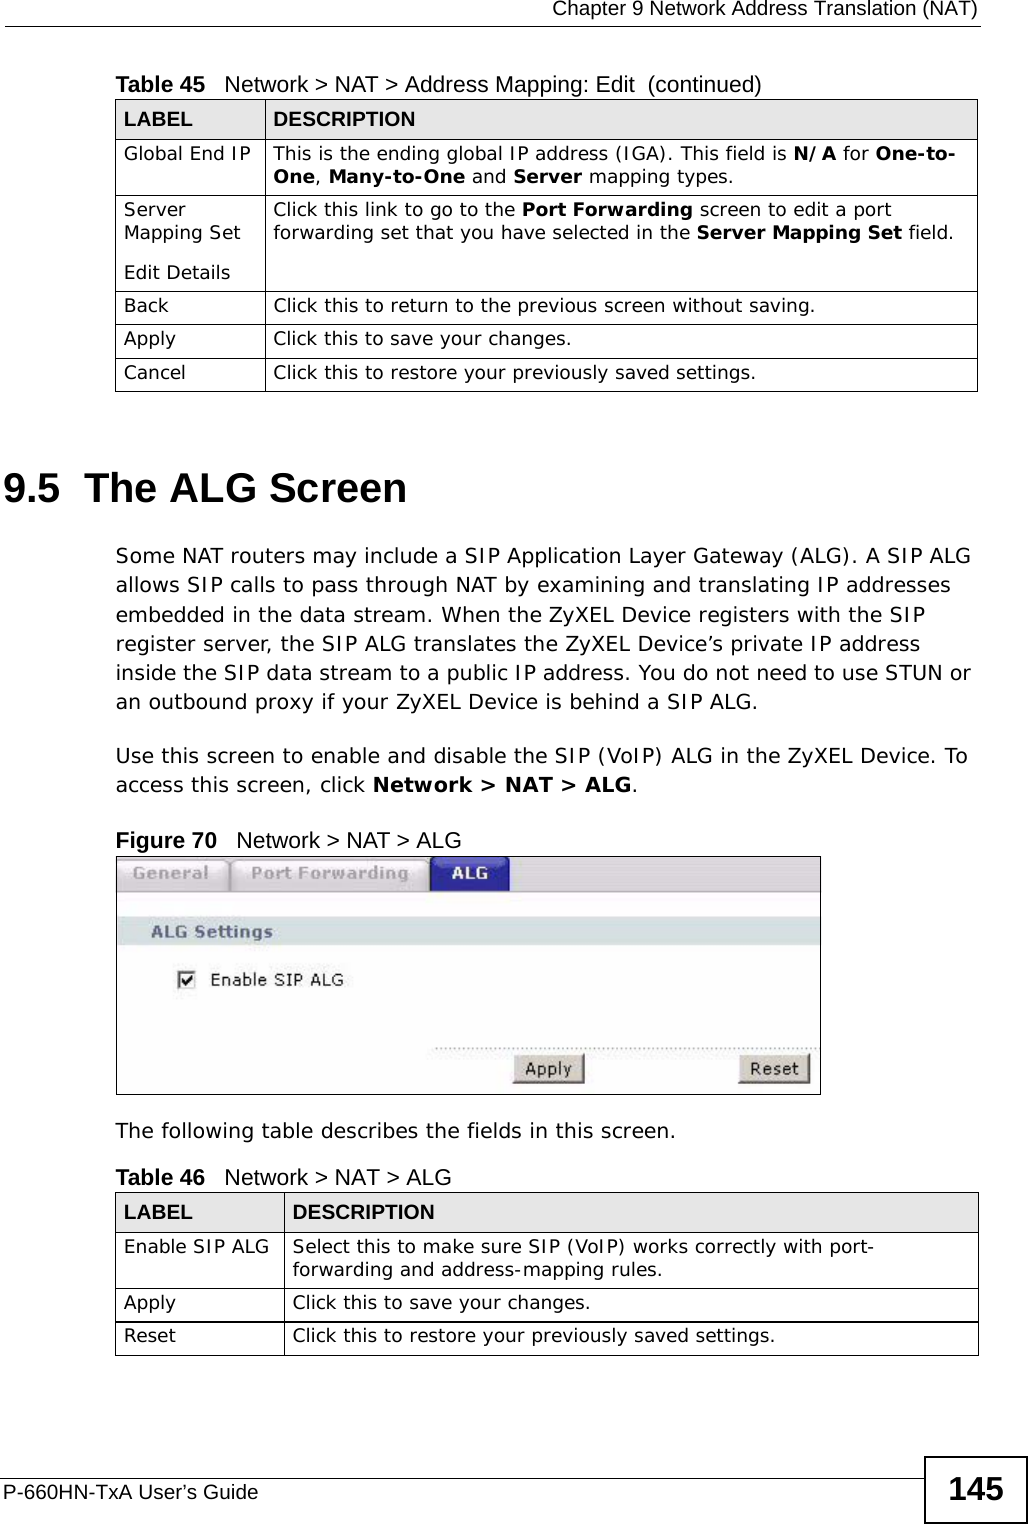  Chapter 9 Network Address Translation (NAT)P-660HN-TxA User’s Guide 1459.5  The ALG ScreenSome NAT routers may include a SIP Application Layer Gateway (ALG). A SIP ALG allows SIP calls to pass through NAT by examining and translating IP addresses embedded in the data stream. When the ZyXEL Device registers with the SIP register server, the SIP ALG translates the ZyXEL Device’s private IP address inside the SIP data stream to a public IP address. You do not need to use STUN or an outbound proxy if your ZyXEL Device is behind a SIP ALG.Use this screen to enable and disable the SIP (VoIP) ALG in the ZyXEL Device. To access this screen, click Network &gt; NAT &gt; ALG.Figure 70   Network &gt; NAT &gt; ALGThe following table describes the fields in this screen.Global End IP This is the ending global IP address (IGA). This field is N/A for One-to-One, Many-to-One and Server mapping types.Server Mapping SetEdit DetailsClick this link to go to the Port Forwarding screen to edit a port forwarding set that you have selected in the Server Mapping Set field.Back Click this to return to the previous screen without saving.Apply Click this to save your changes.Cancel Click this to restore your previously saved settings.Table 45   Network &gt; NAT &gt; Address Mapping: Edit  (continued)LABEL DESCRIPTIONTable 46   Network &gt; NAT &gt; ALGLABEL DESCRIPTIONEnable SIP ALG Select this to make sure SIP (VoIP) works correctly with port-forwarding and address-mapping rules.Apply Click this to save your changes.Reset Click this to restore your previously saved settings.